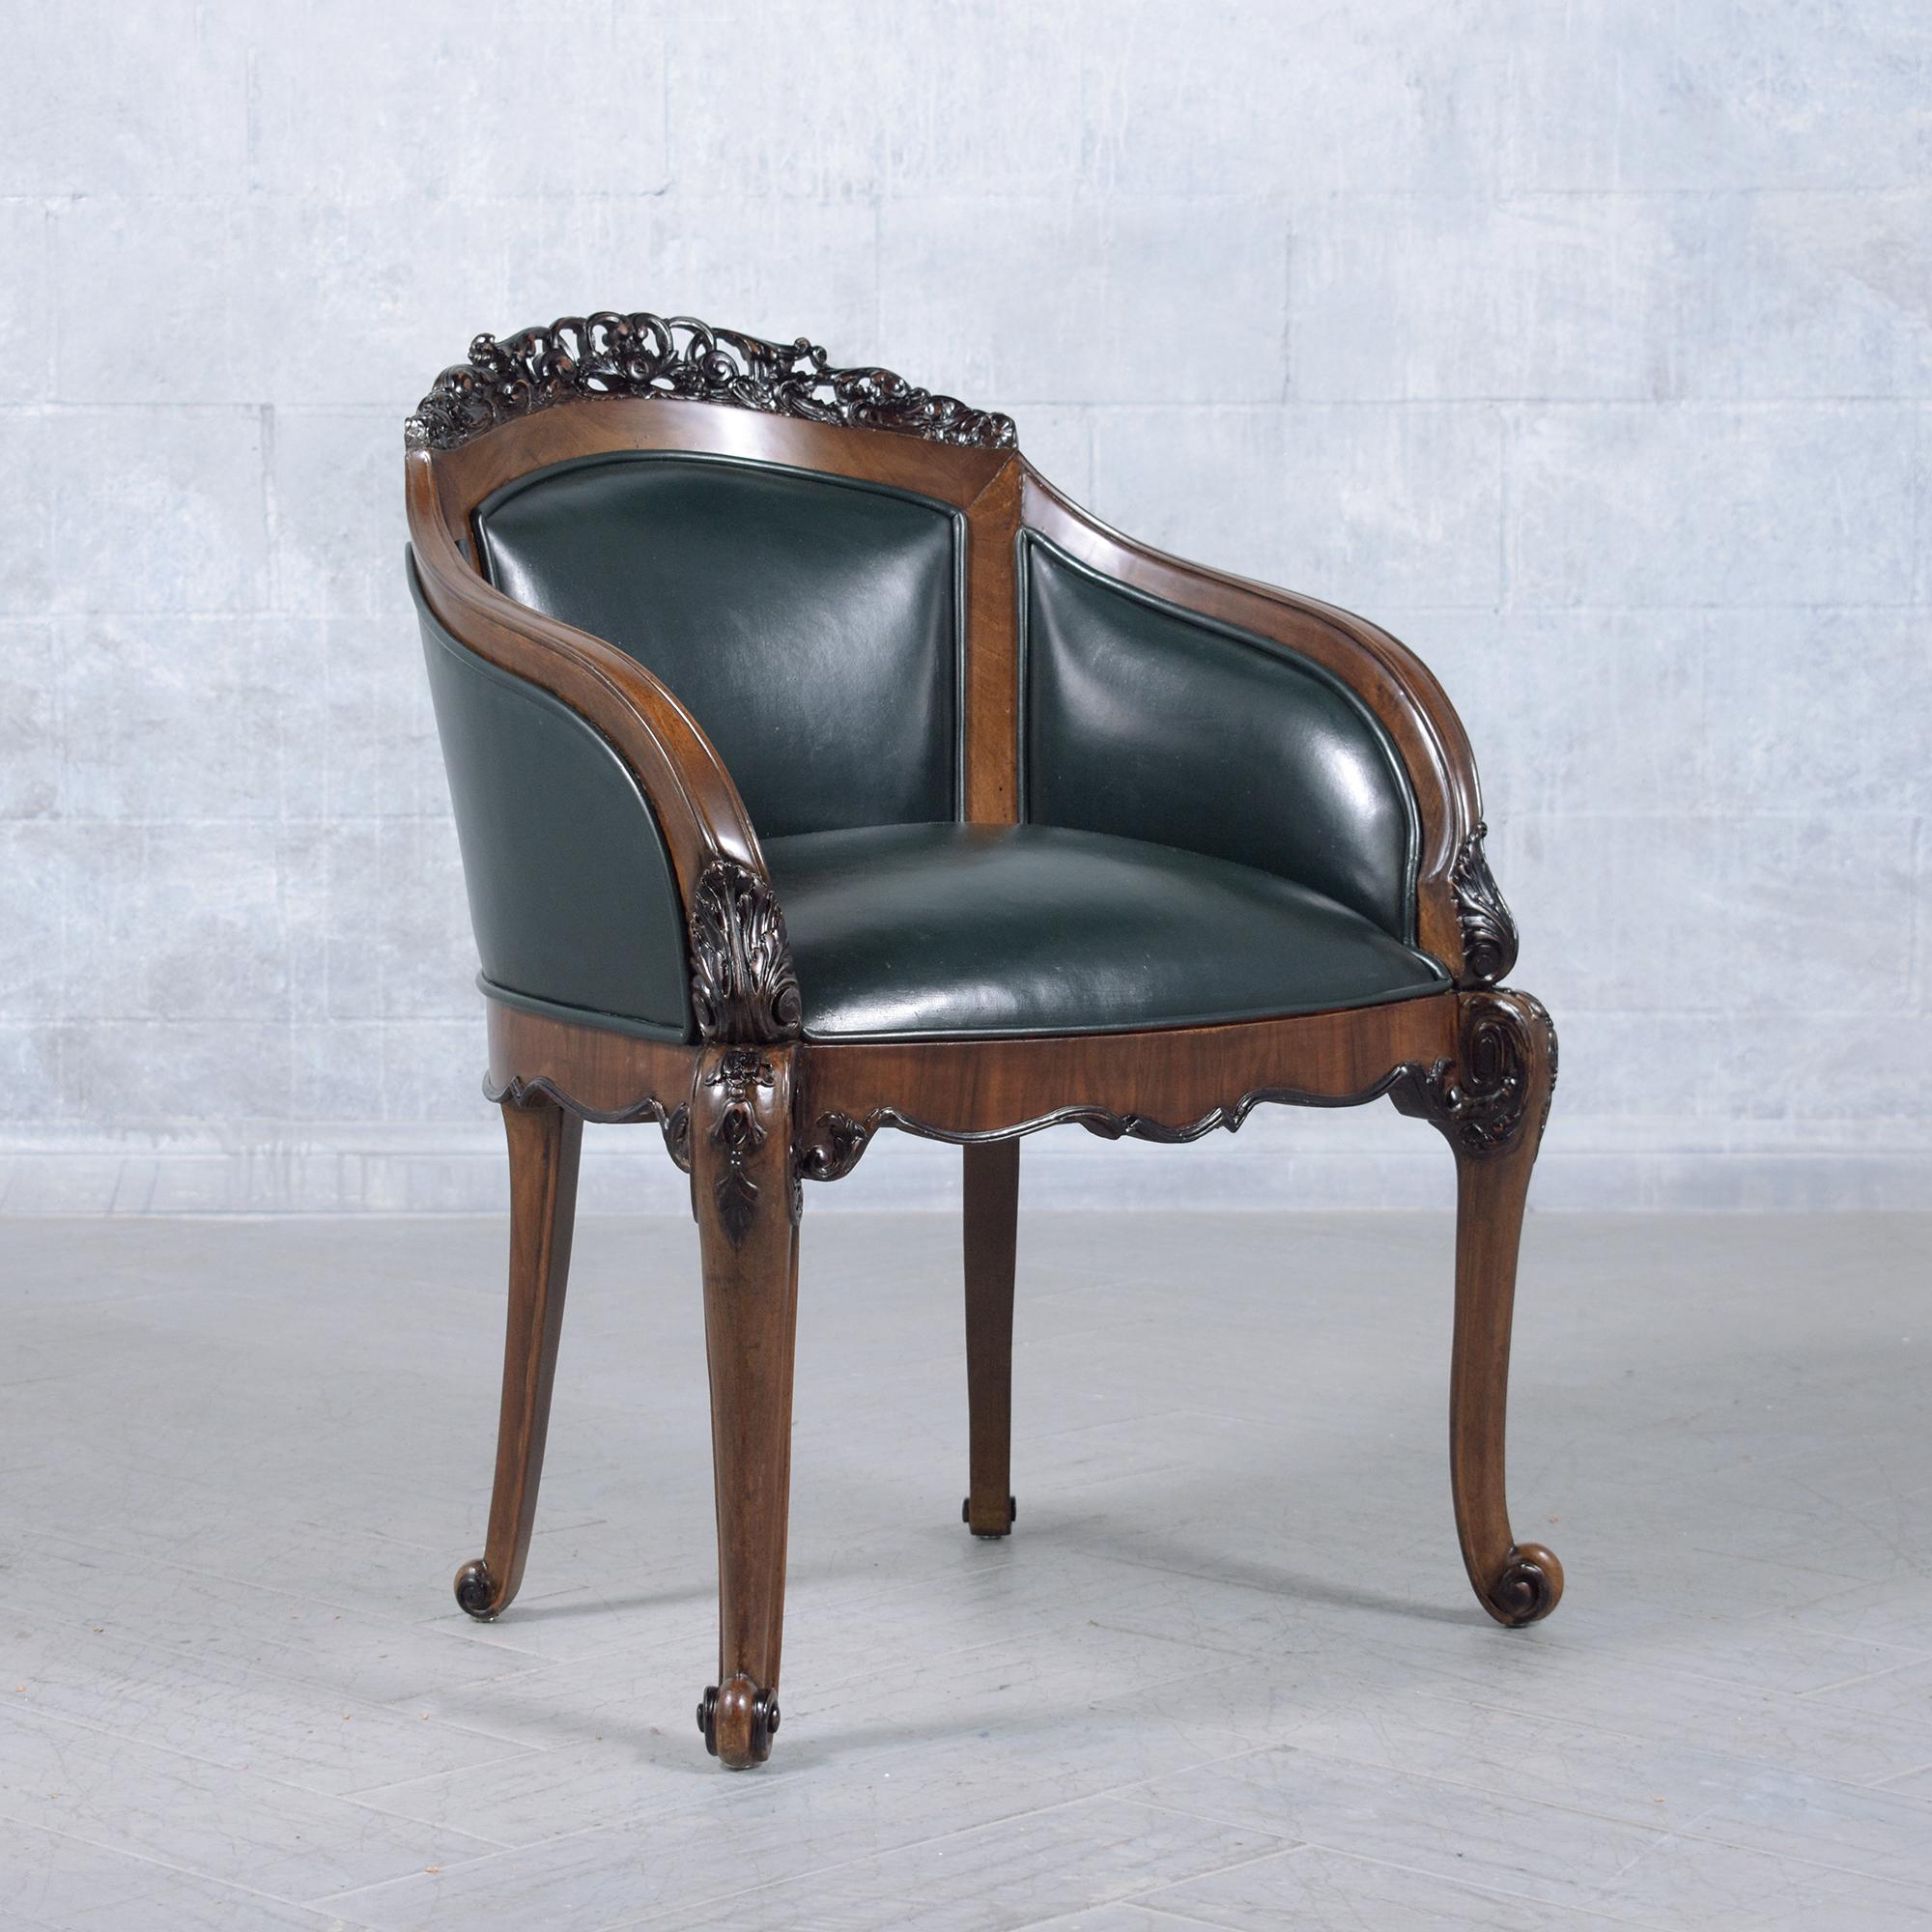 19th-Century English Chinoiserie Bergères: Restored Elegance in Green Leather For Sale 5